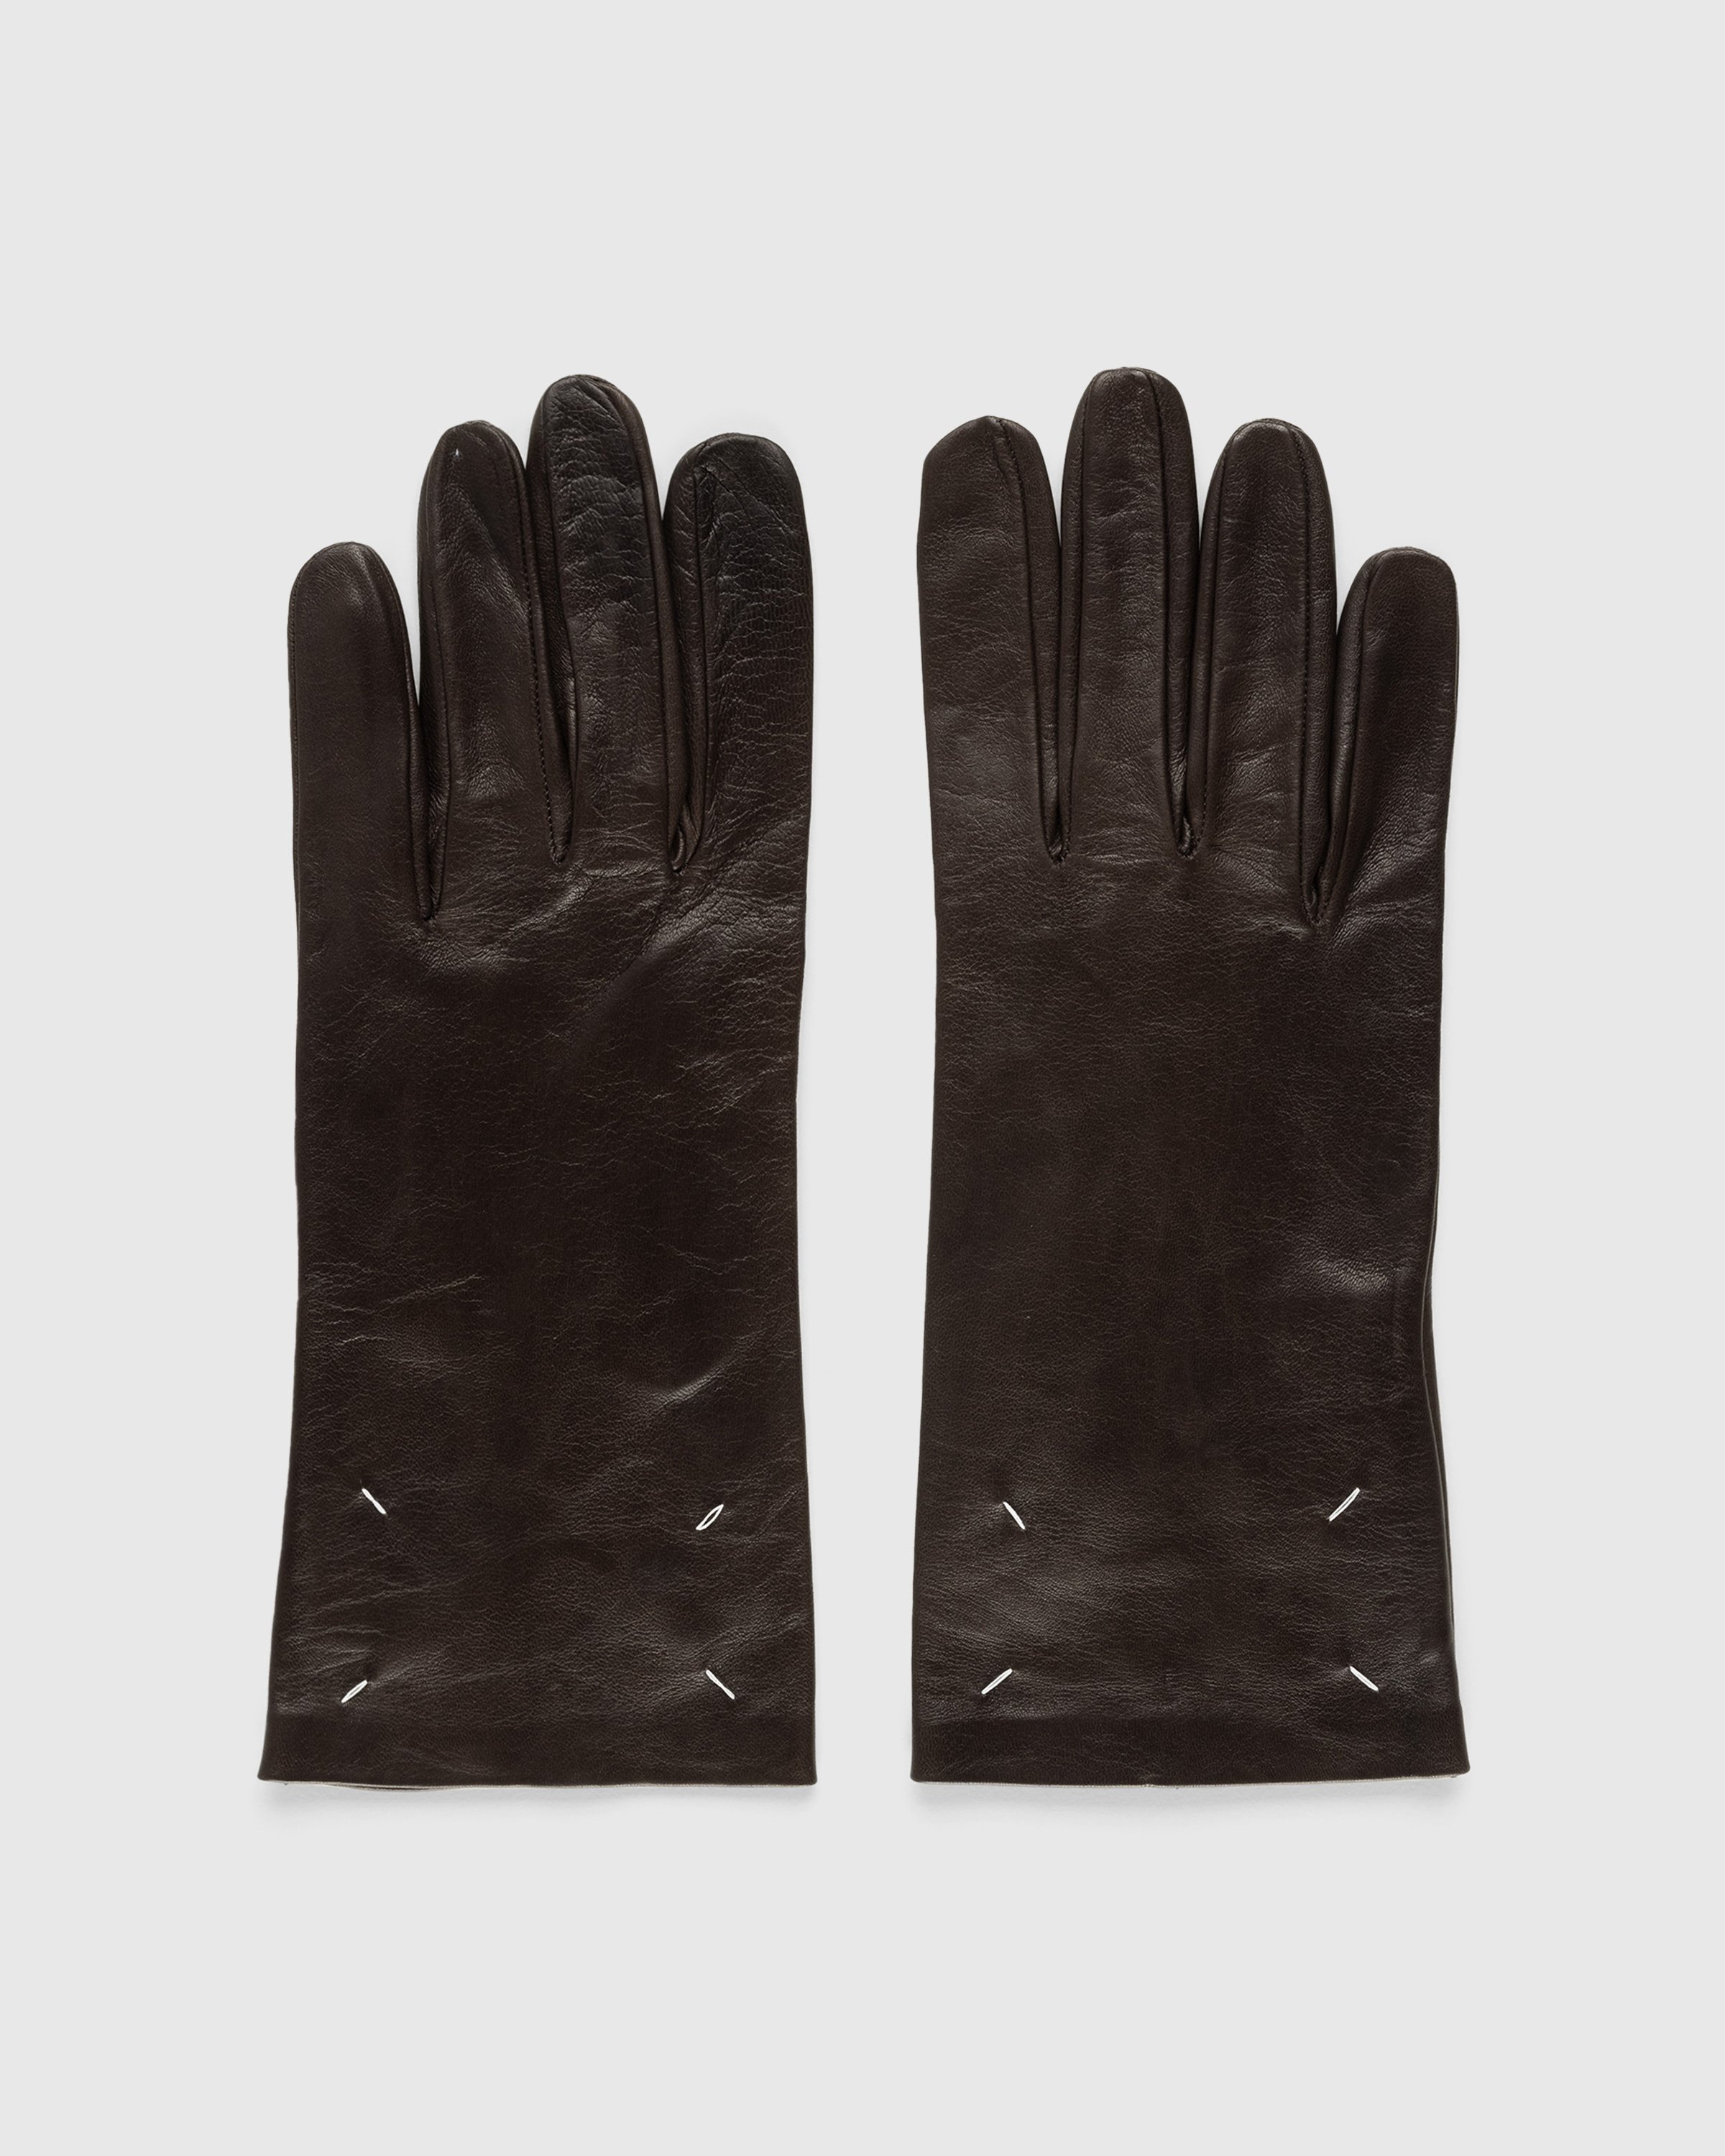 Maison Margiela - Nappa Leather Gloves Chocolate - Accessories - Brown - Image 1